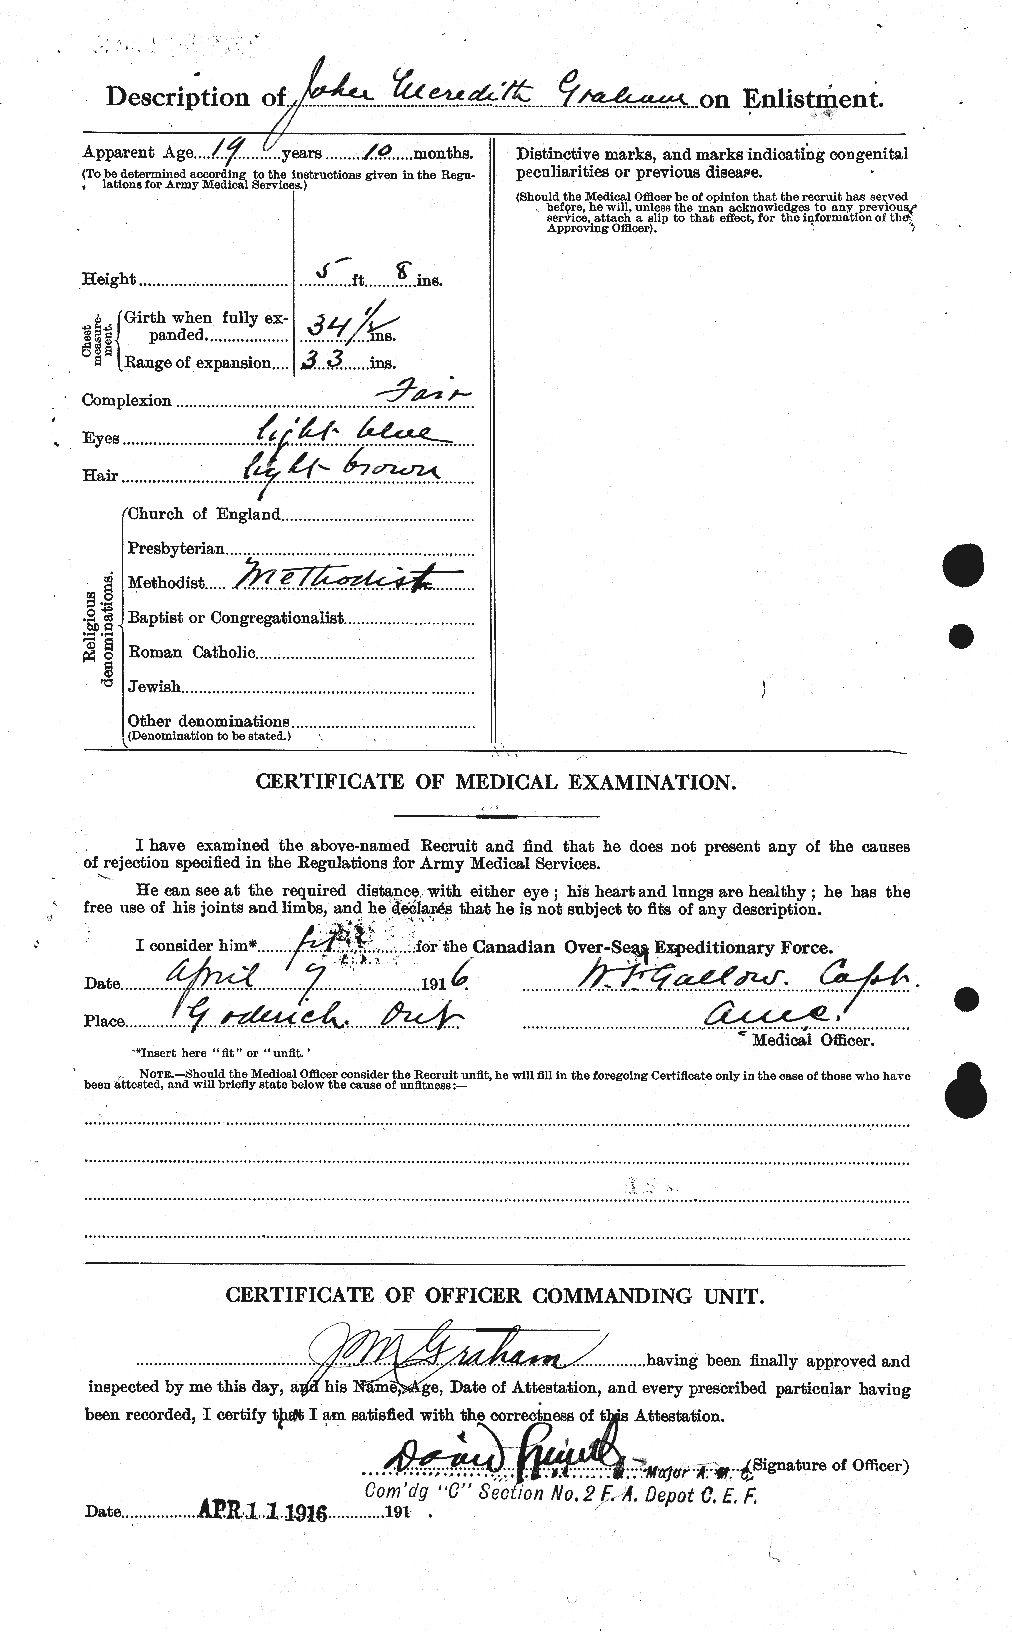 Personnel Records of the First World War - CEF 359199b